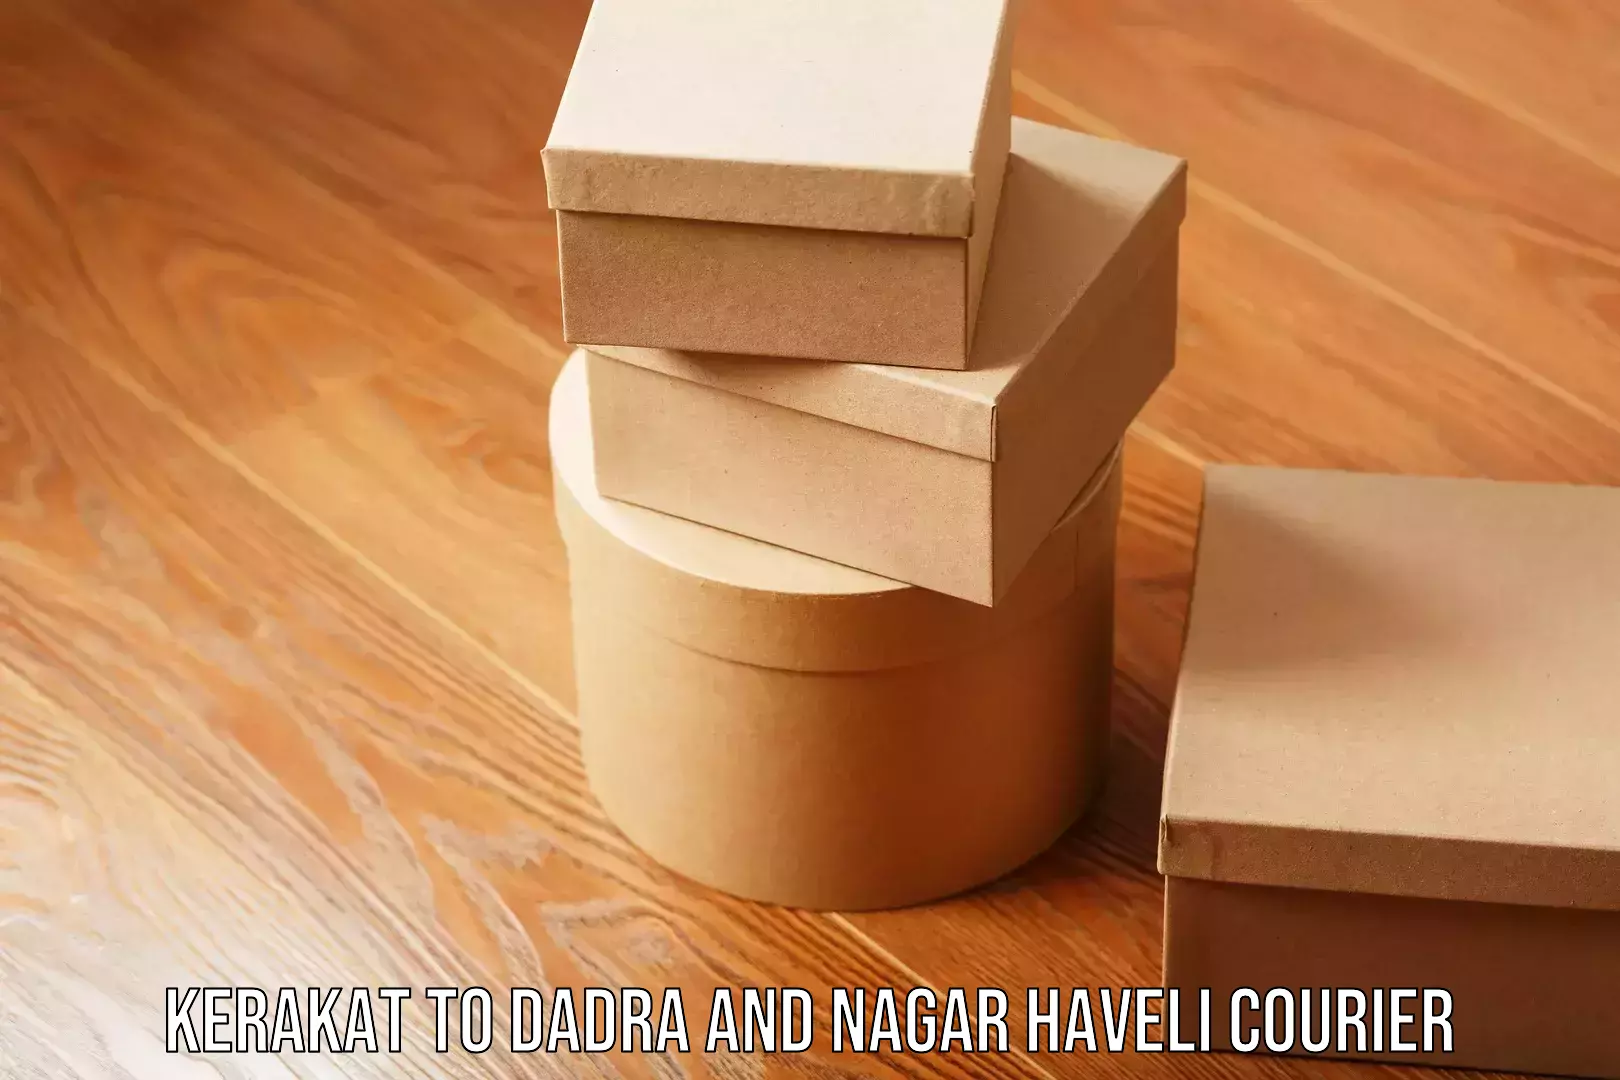 Dependable moving services in Kerakat to Dadra and Nagar Haveli